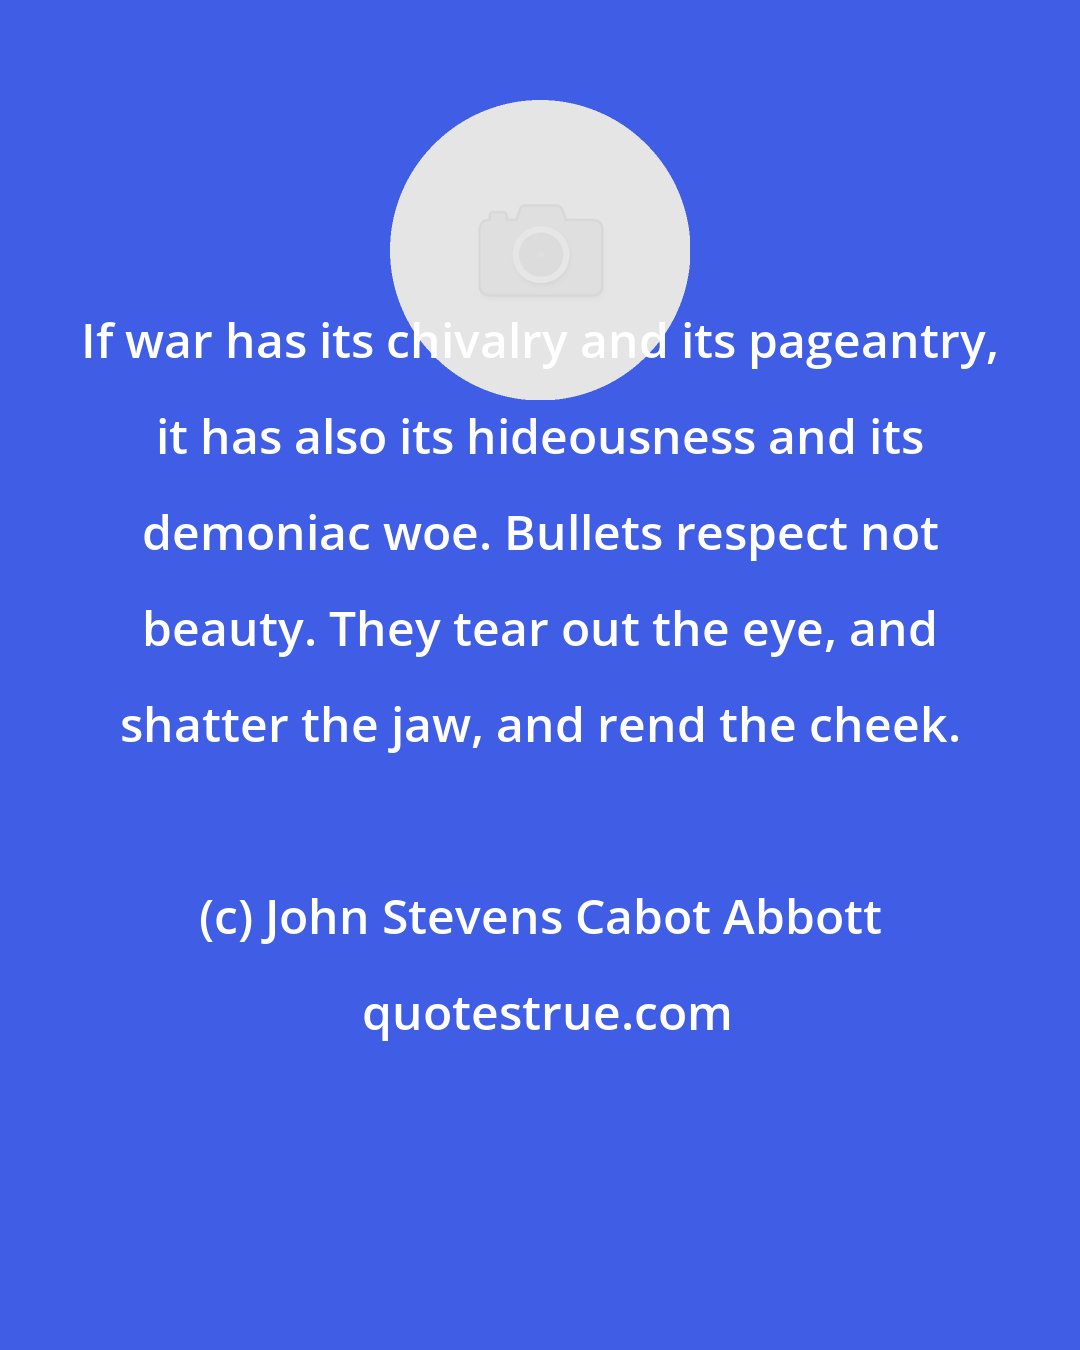 John Stevens Cabot Abbott: If war has its chivalry and its pageantry, it has also its hideousness and its demoniac woe. Bullets respect not beauty. They tear out the eye, and shatter the jaw, and rend the cheek.